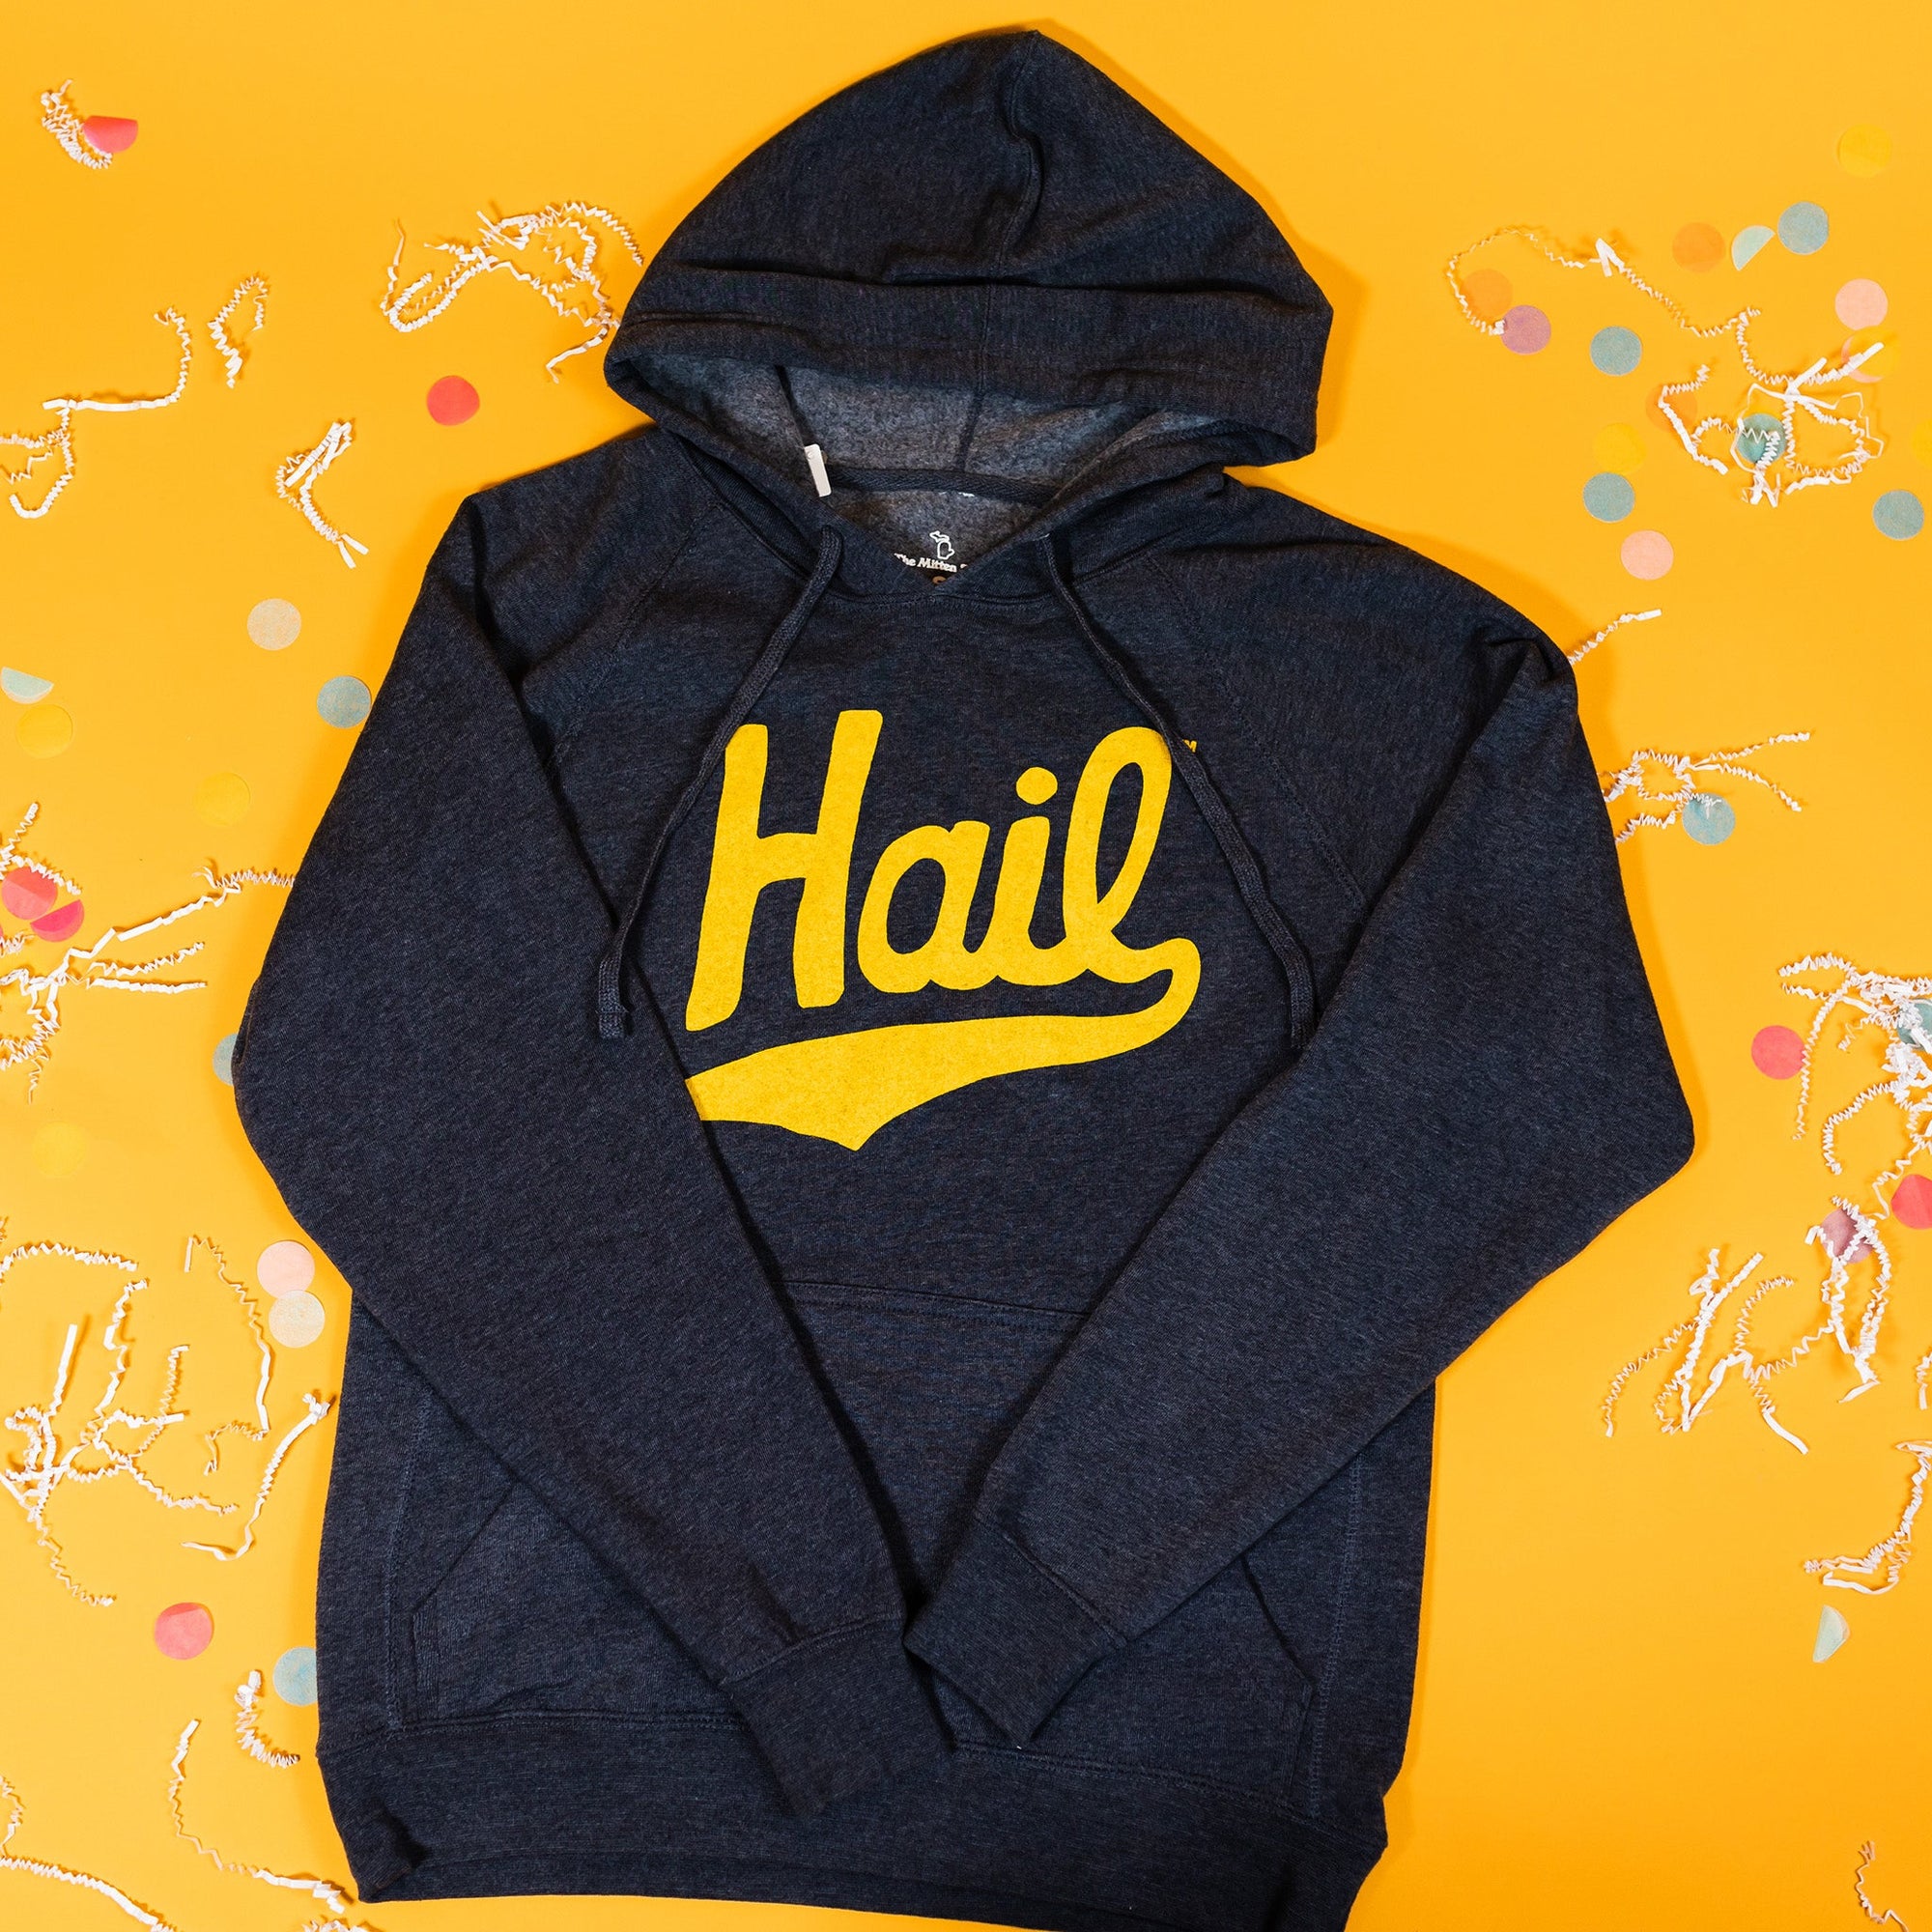 On a sunny mustard background sits a sweatshirt with white crinkle and big, colorful confetti scattered around. This navy sweatshirt features a vintage, hand lettered "Hail" in maize.